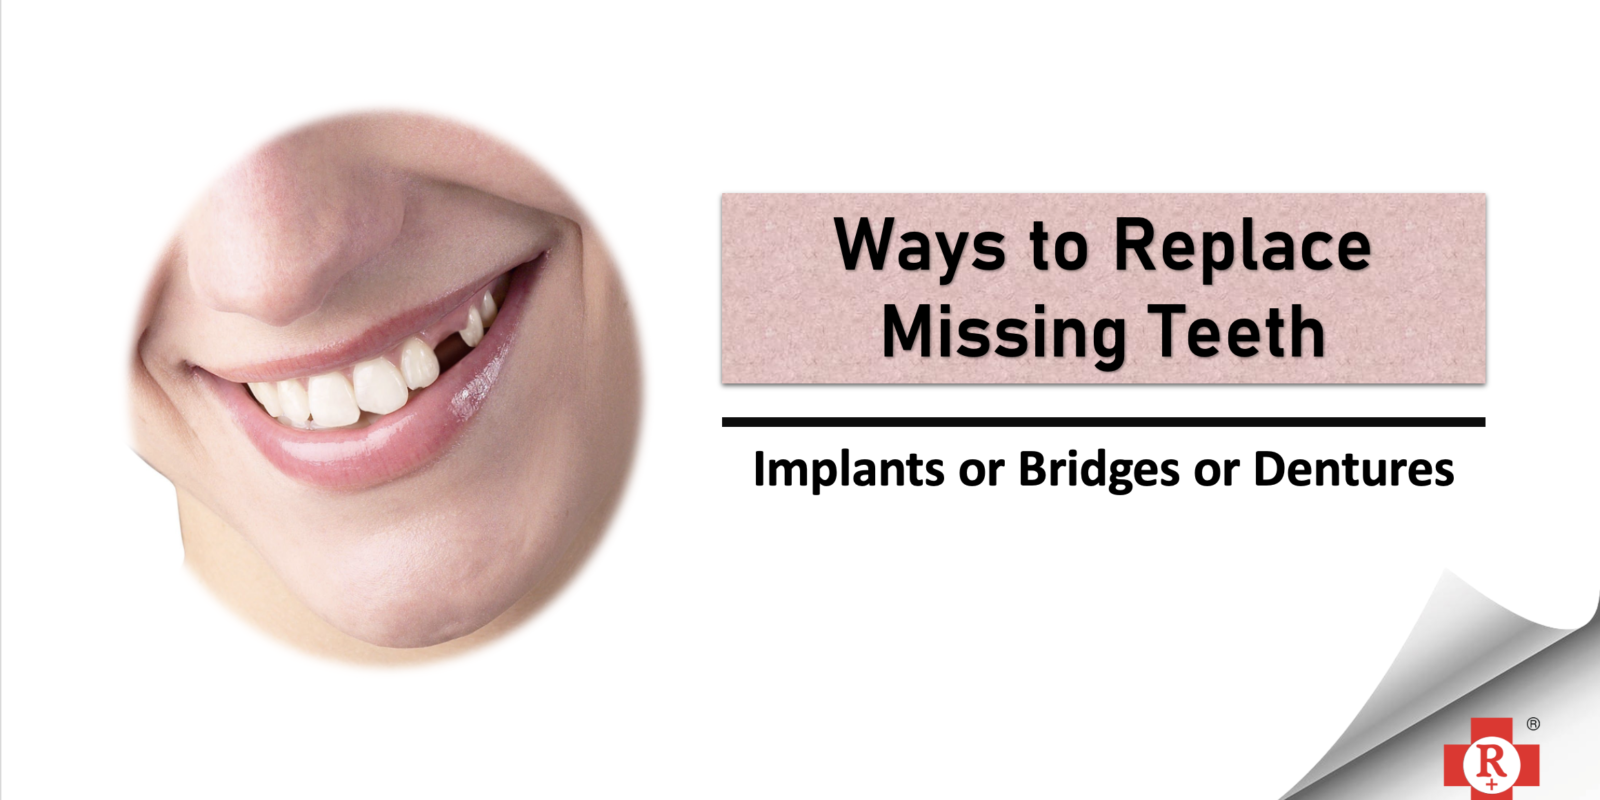 Missing Teeth replacement